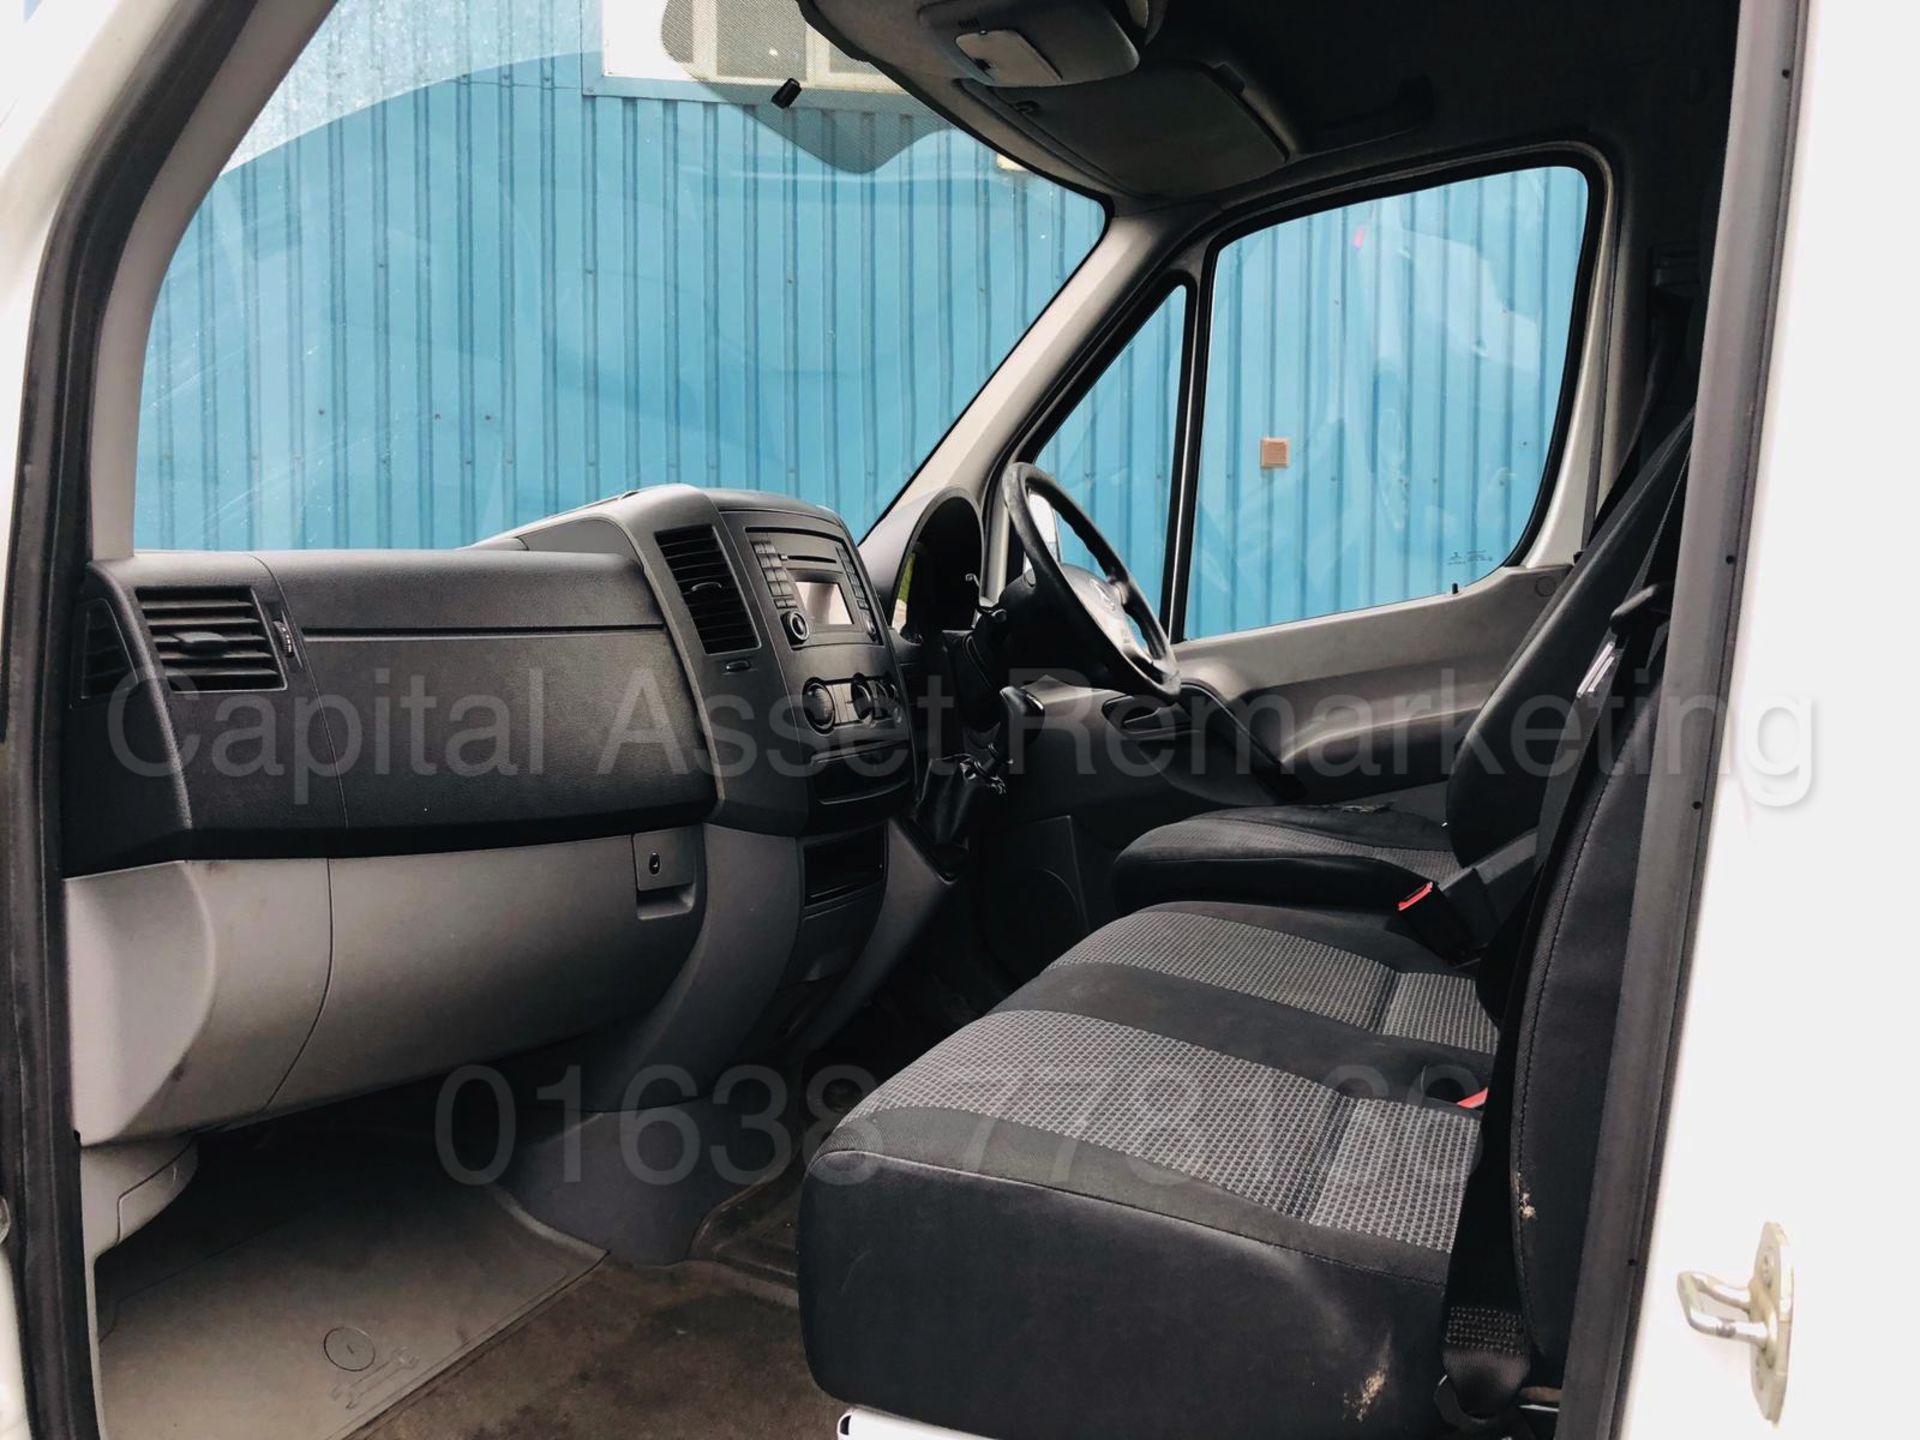 MERCEDES-BENZ SPRINTER 313 CDI *LWB HI-ROOF* (2014 MODEL) '130 BHP - 6 SPEED' (1 OWNER FROM NEW) - Image 15 of 32